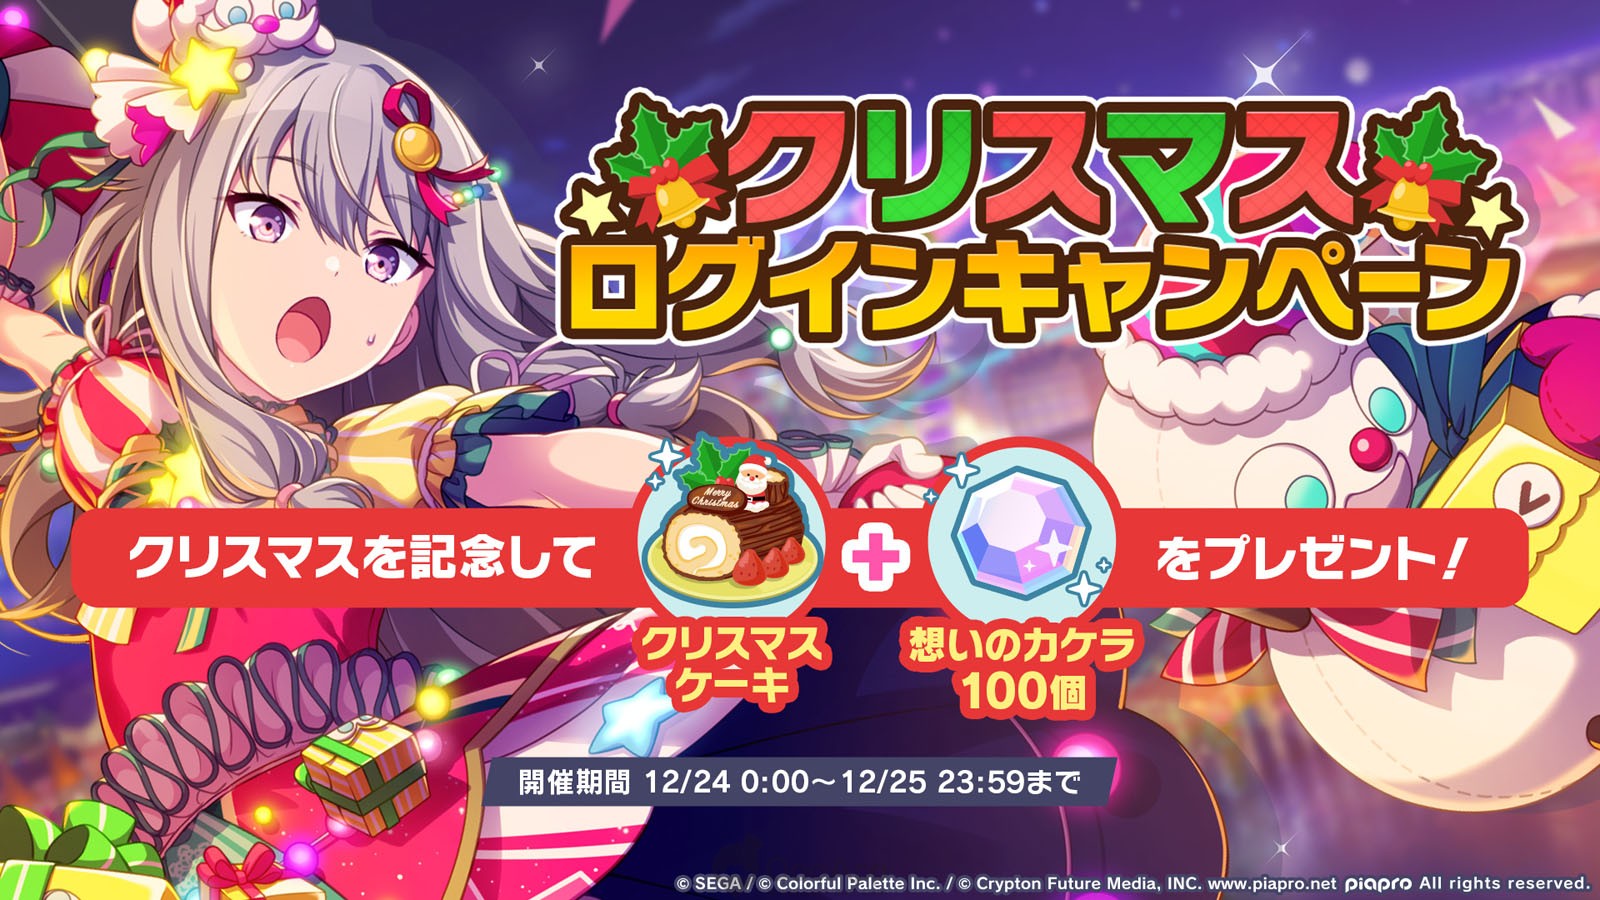 Project Sekai Reveals New “Bond Rank” Game System, Christmas & New Year Events